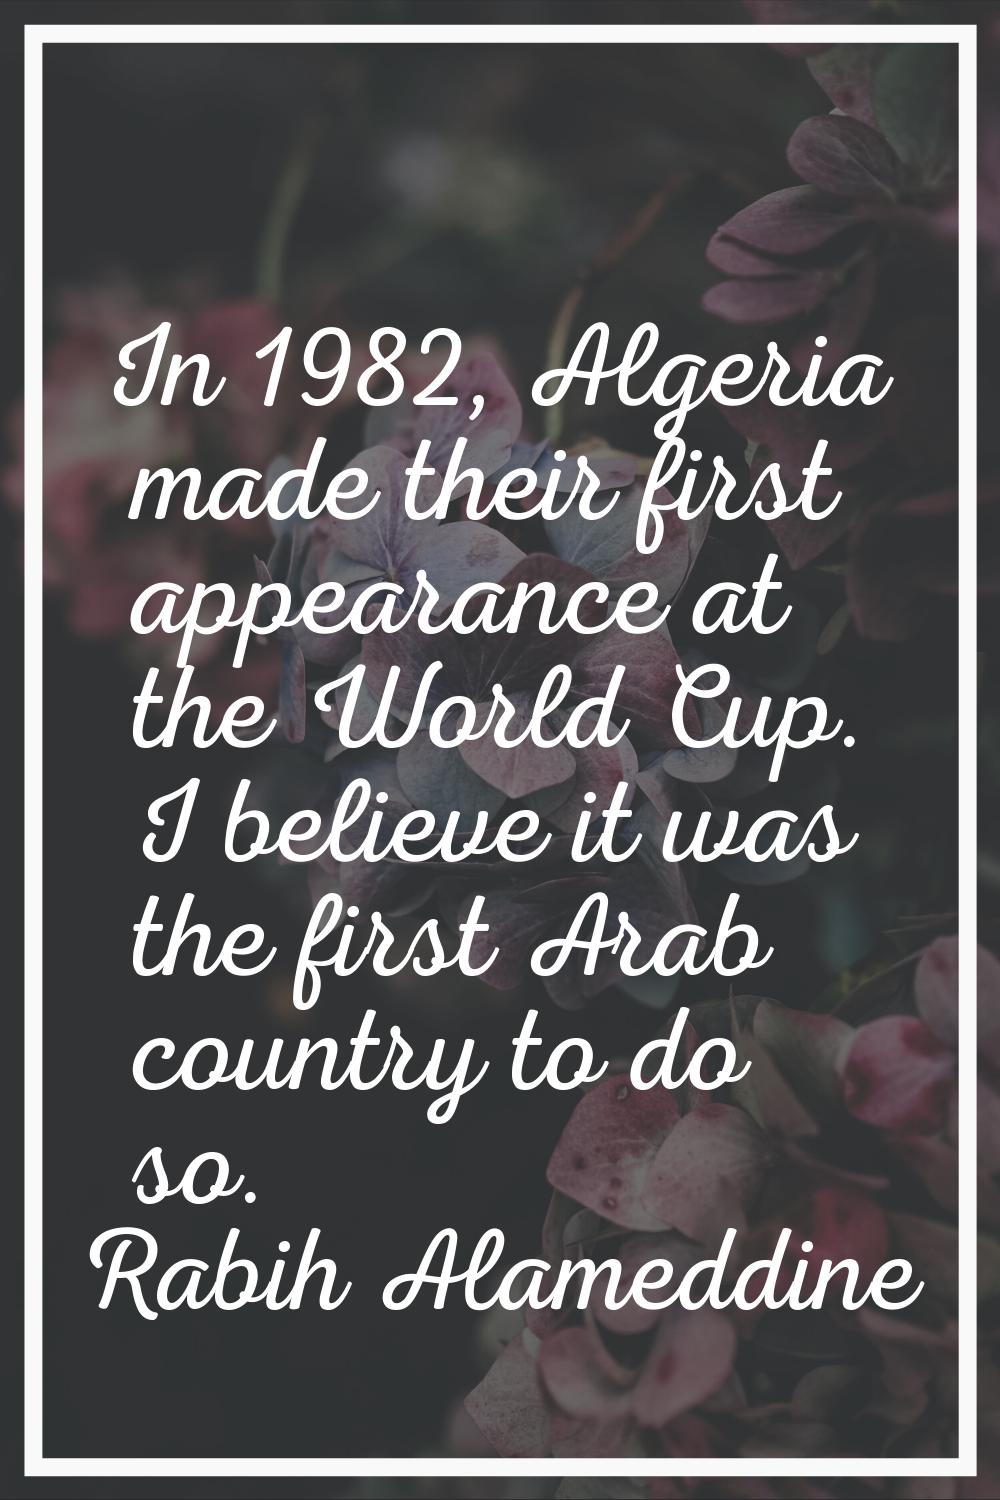 In 1982, Algeria made their first appearance at the World Cup. I believe it was the first Arab coun